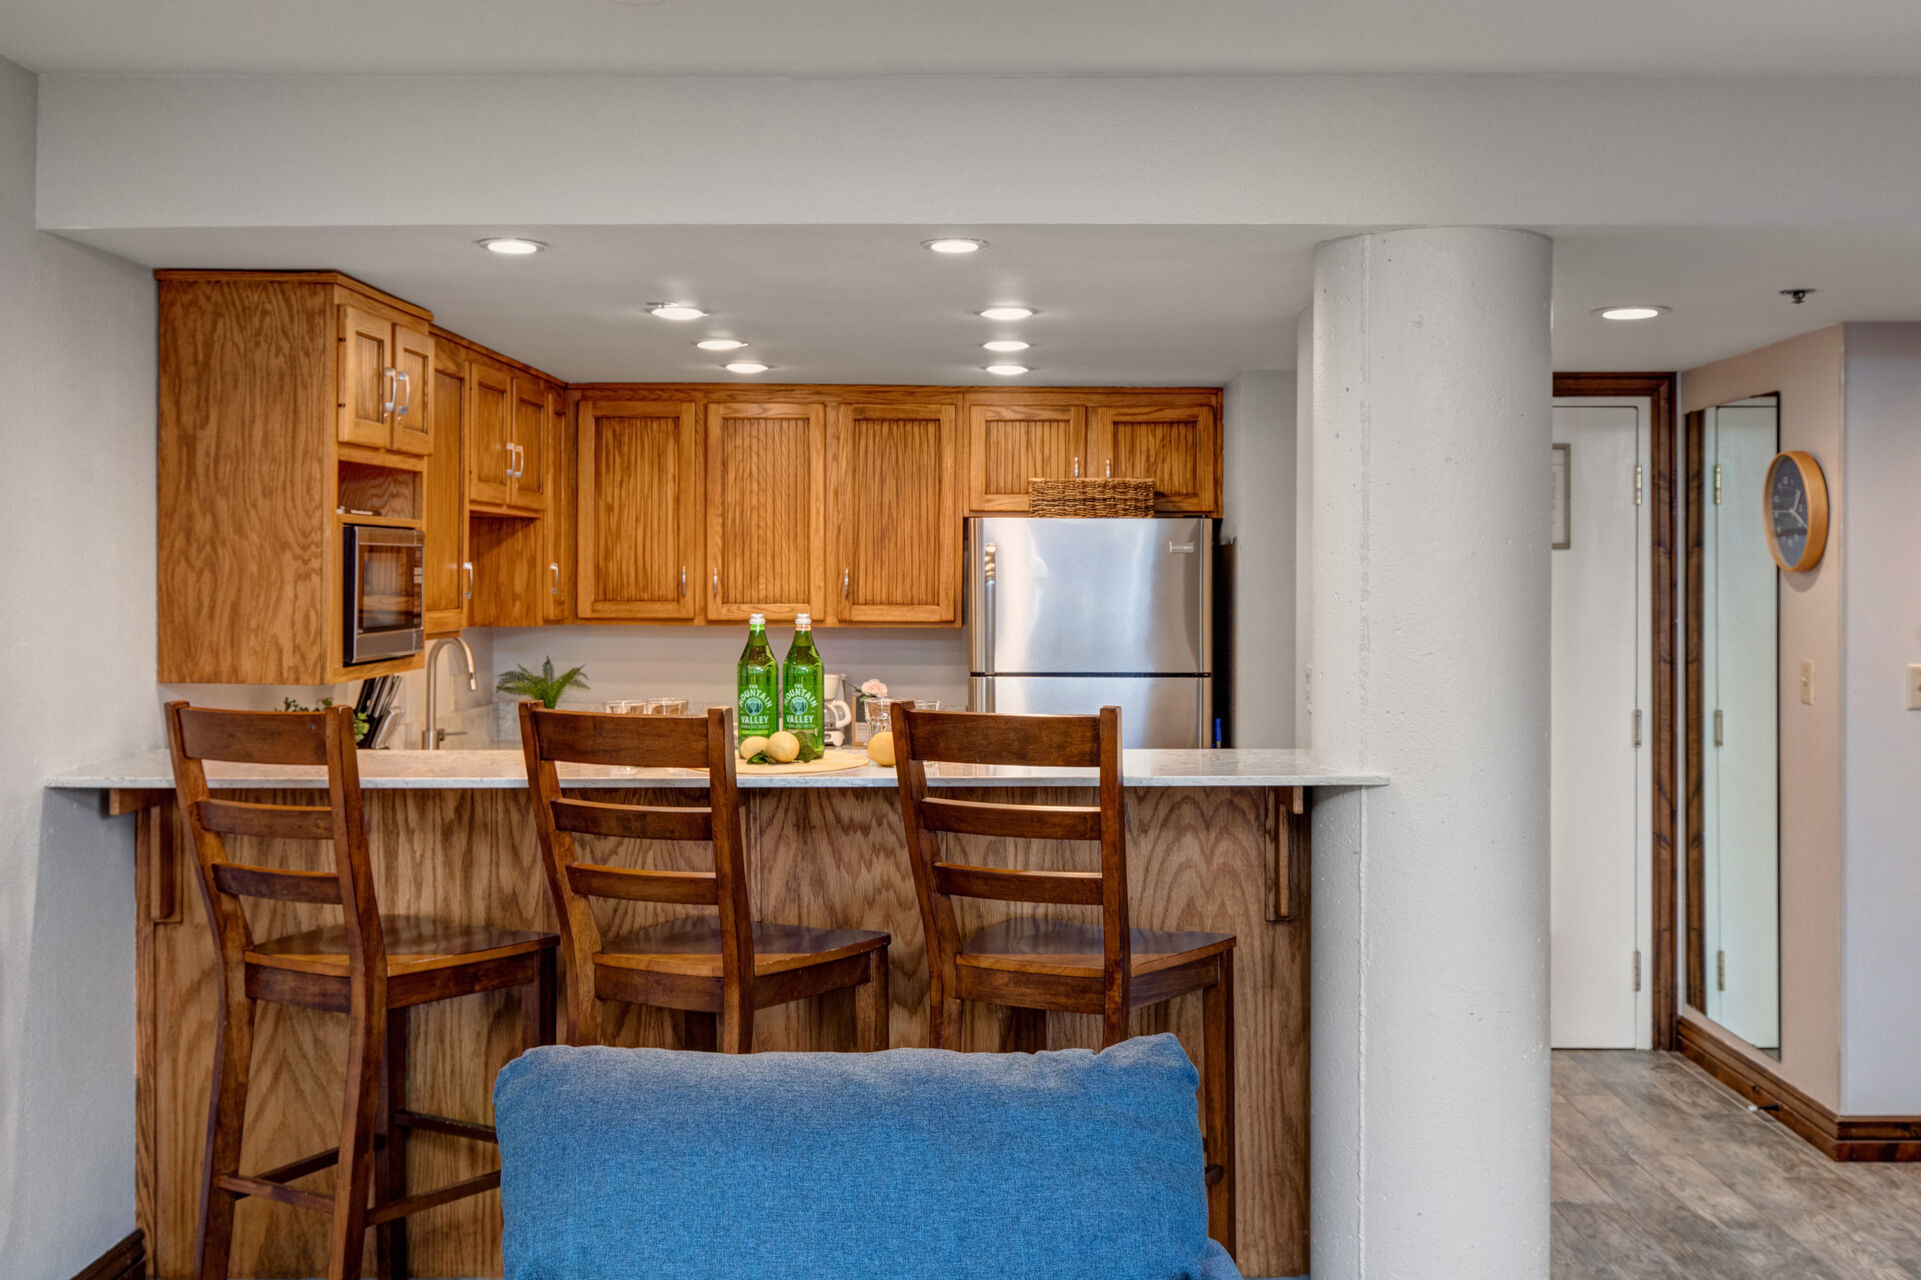 Fully Equipped Kitchen with stone countertops, stainless steel appliances, and bar seating for three